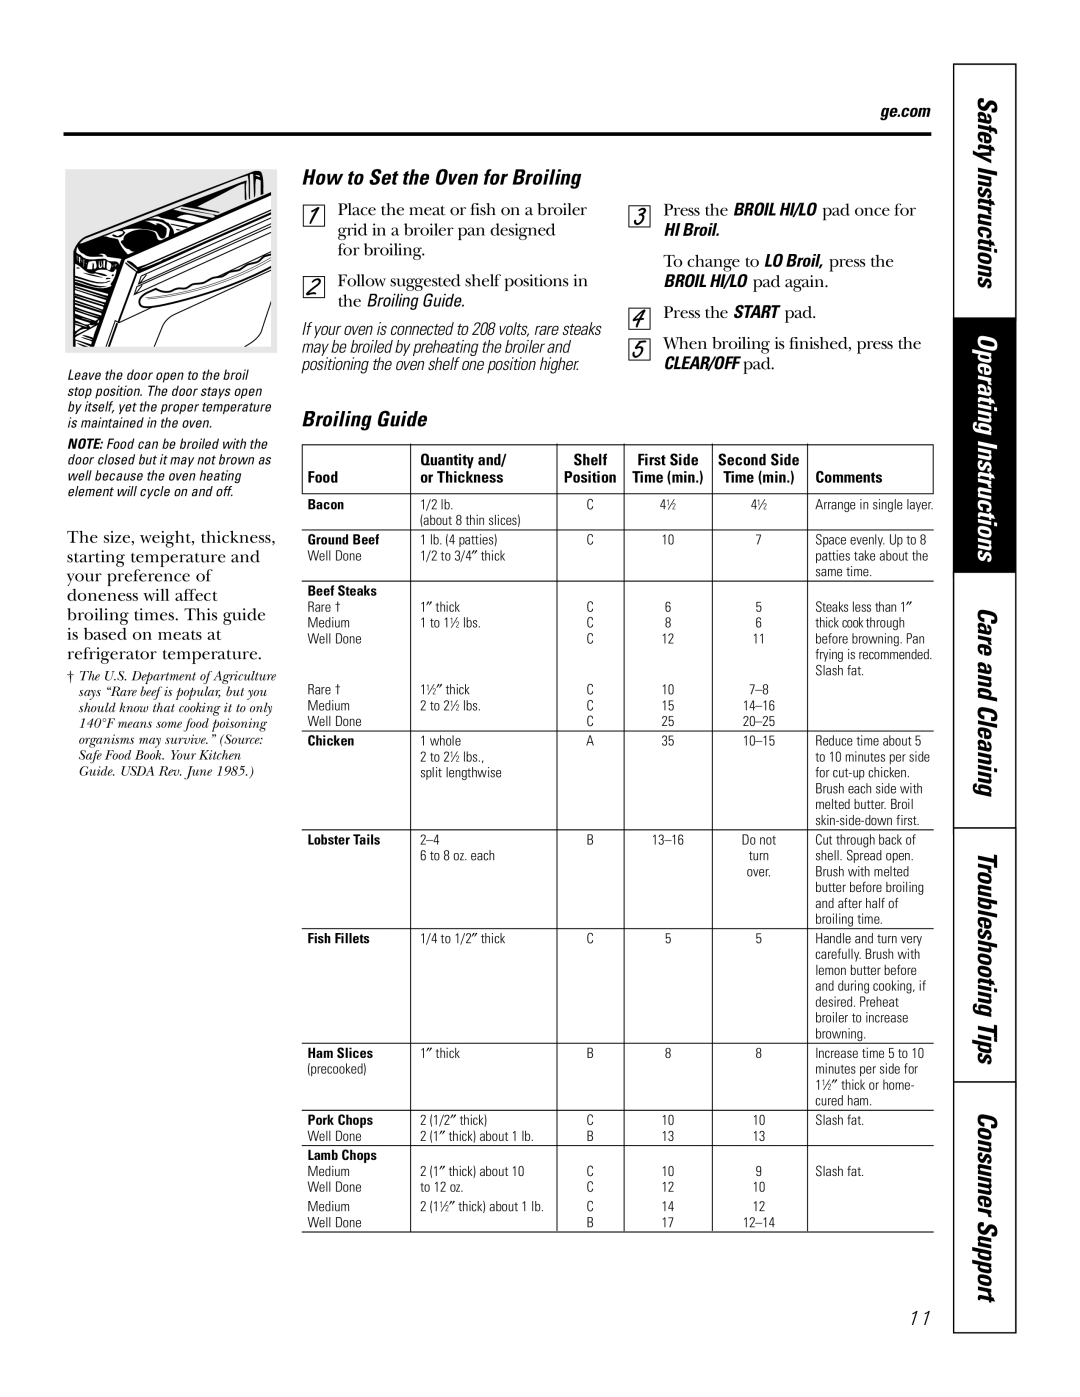 GE JKS06 How to Set the Oven for Broiling, Instructions Operating, Safety, the Broiling Guide, Quantity and, Shelf 